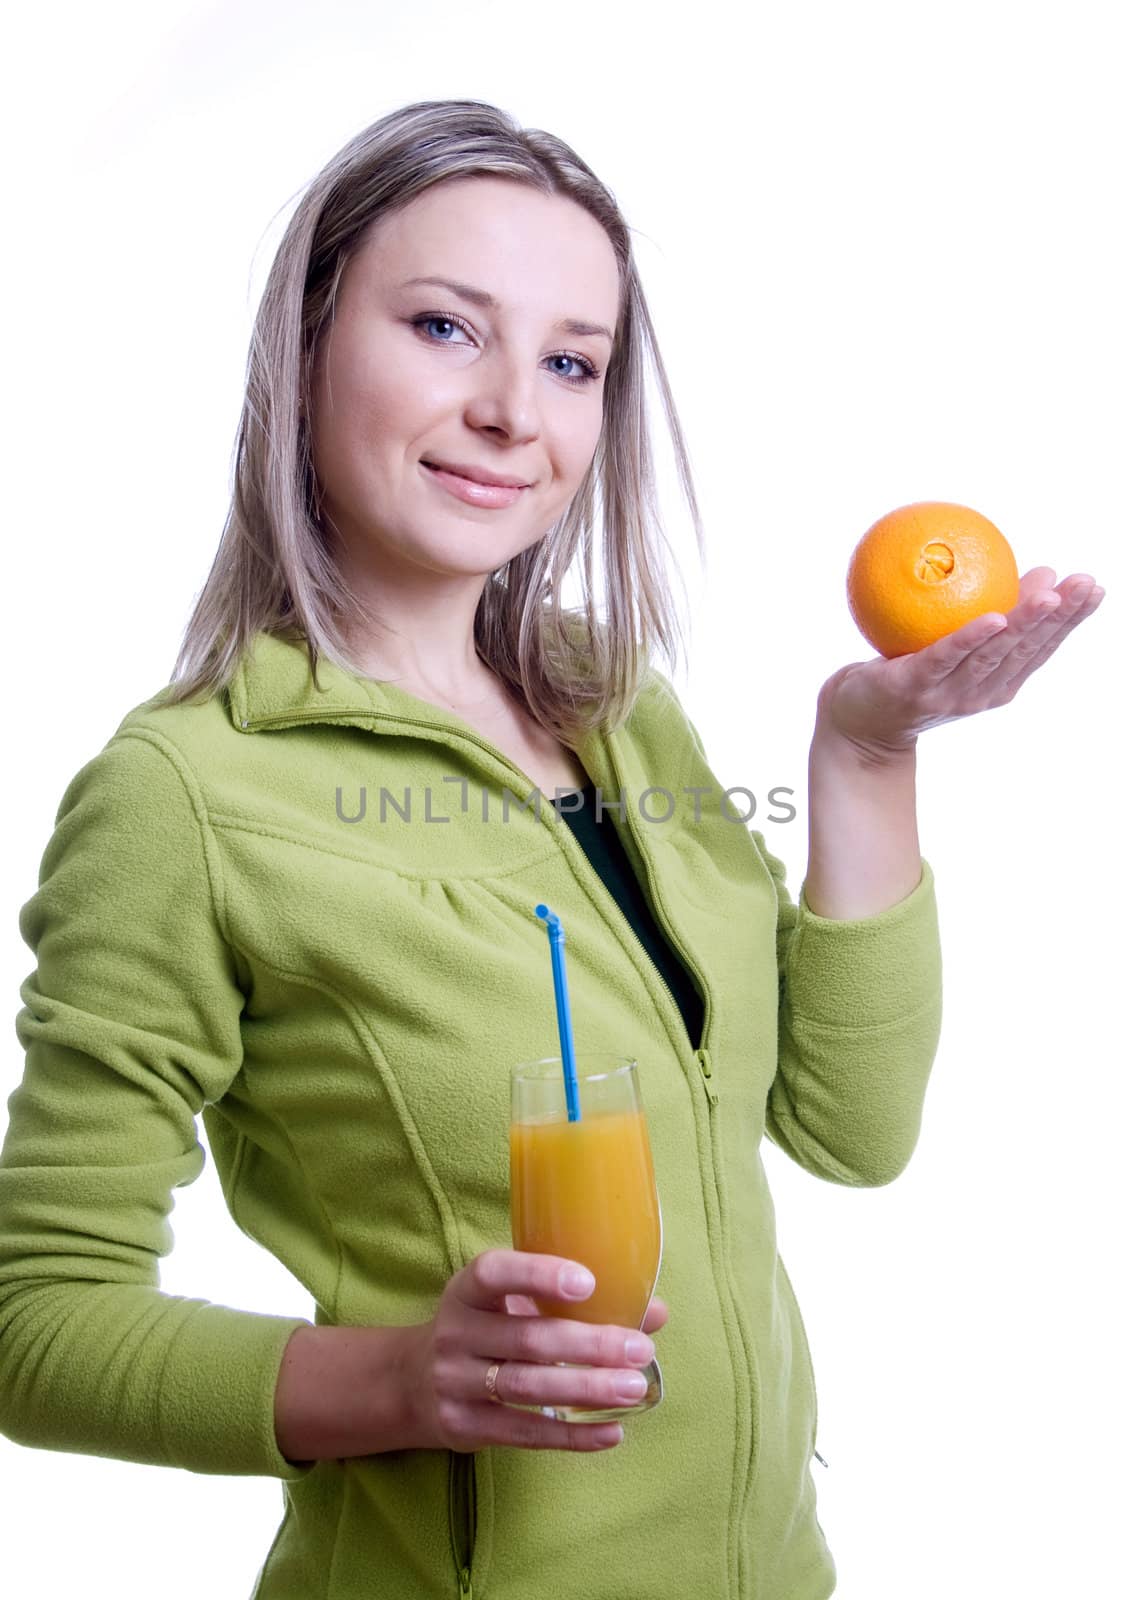 Girl with orange juice and oranges in hand isolated on white background
